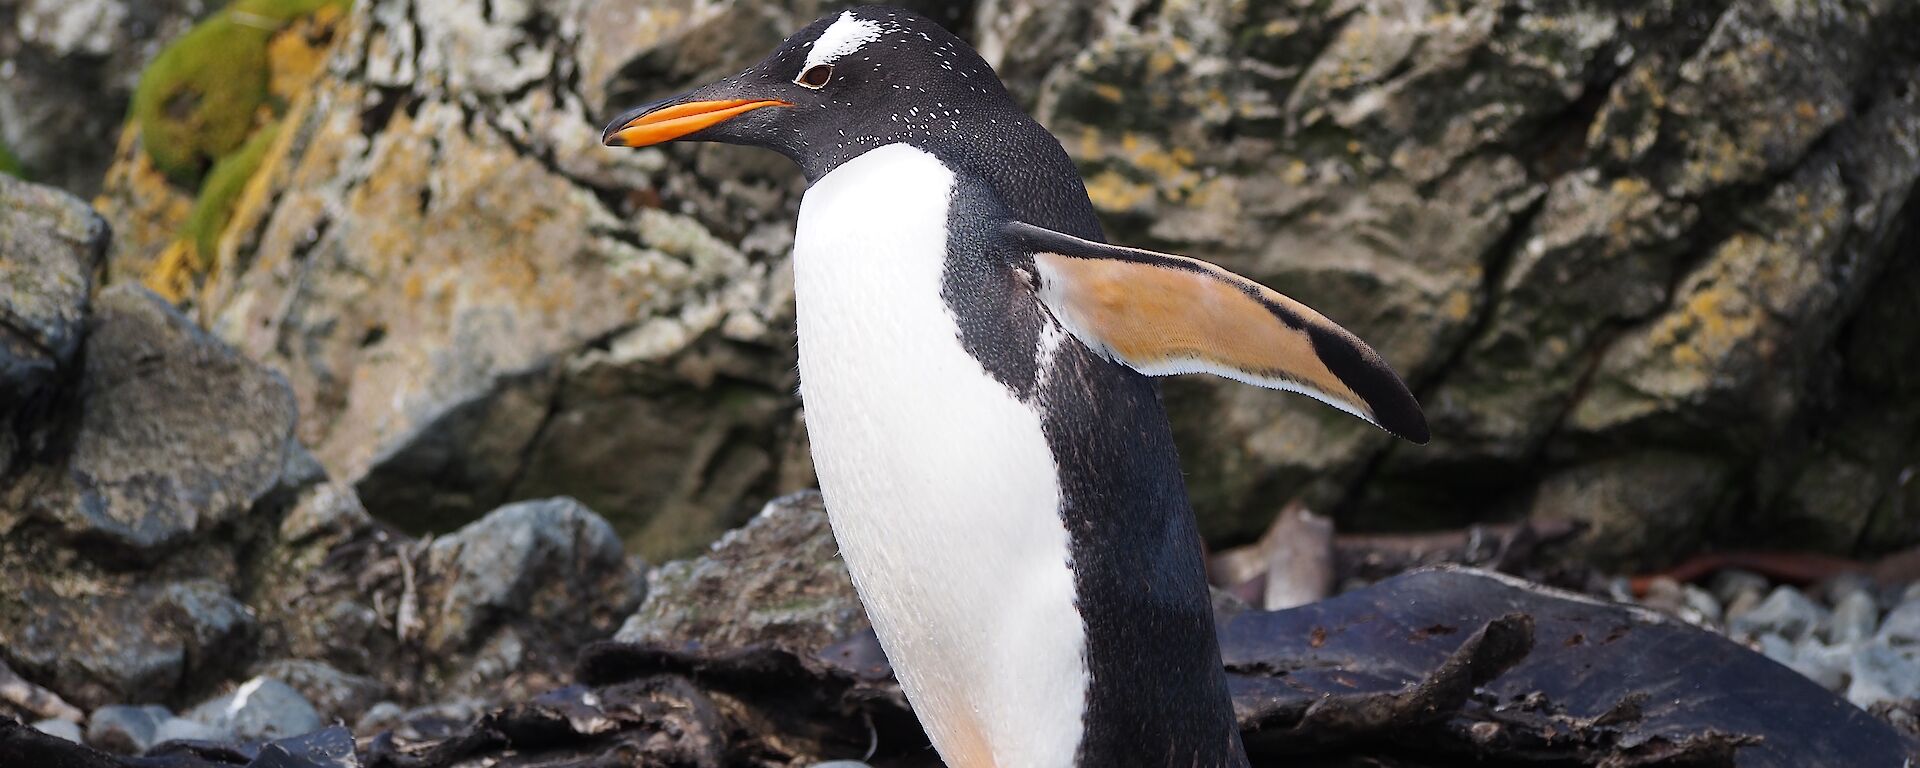 A gentoo penguin steps out on the beach at Macquarie Island